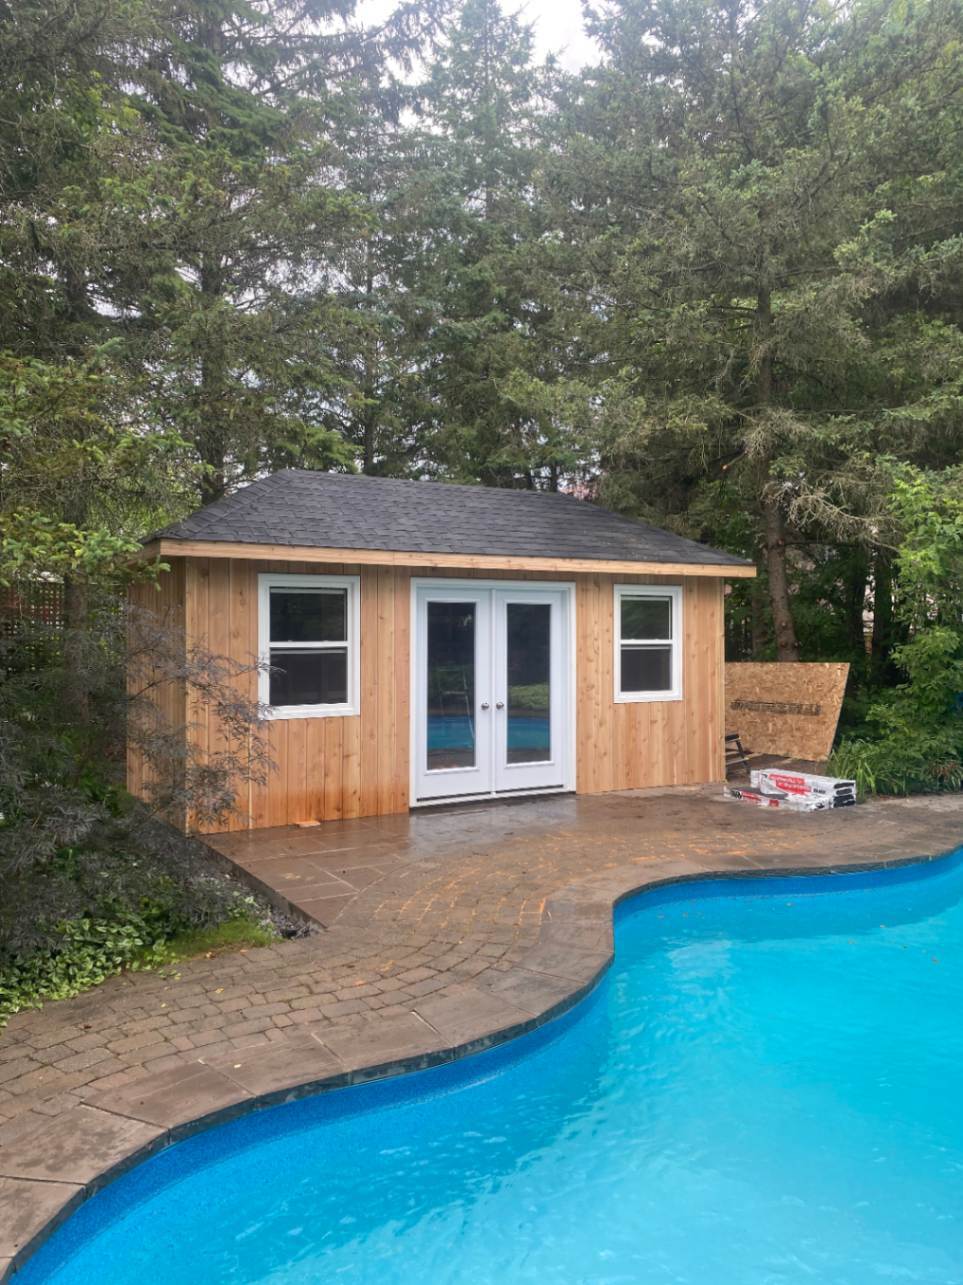 Front view of 8' x 19' Sonoma Pool Cabana located in Kirkland, Washington – Summerwood Products